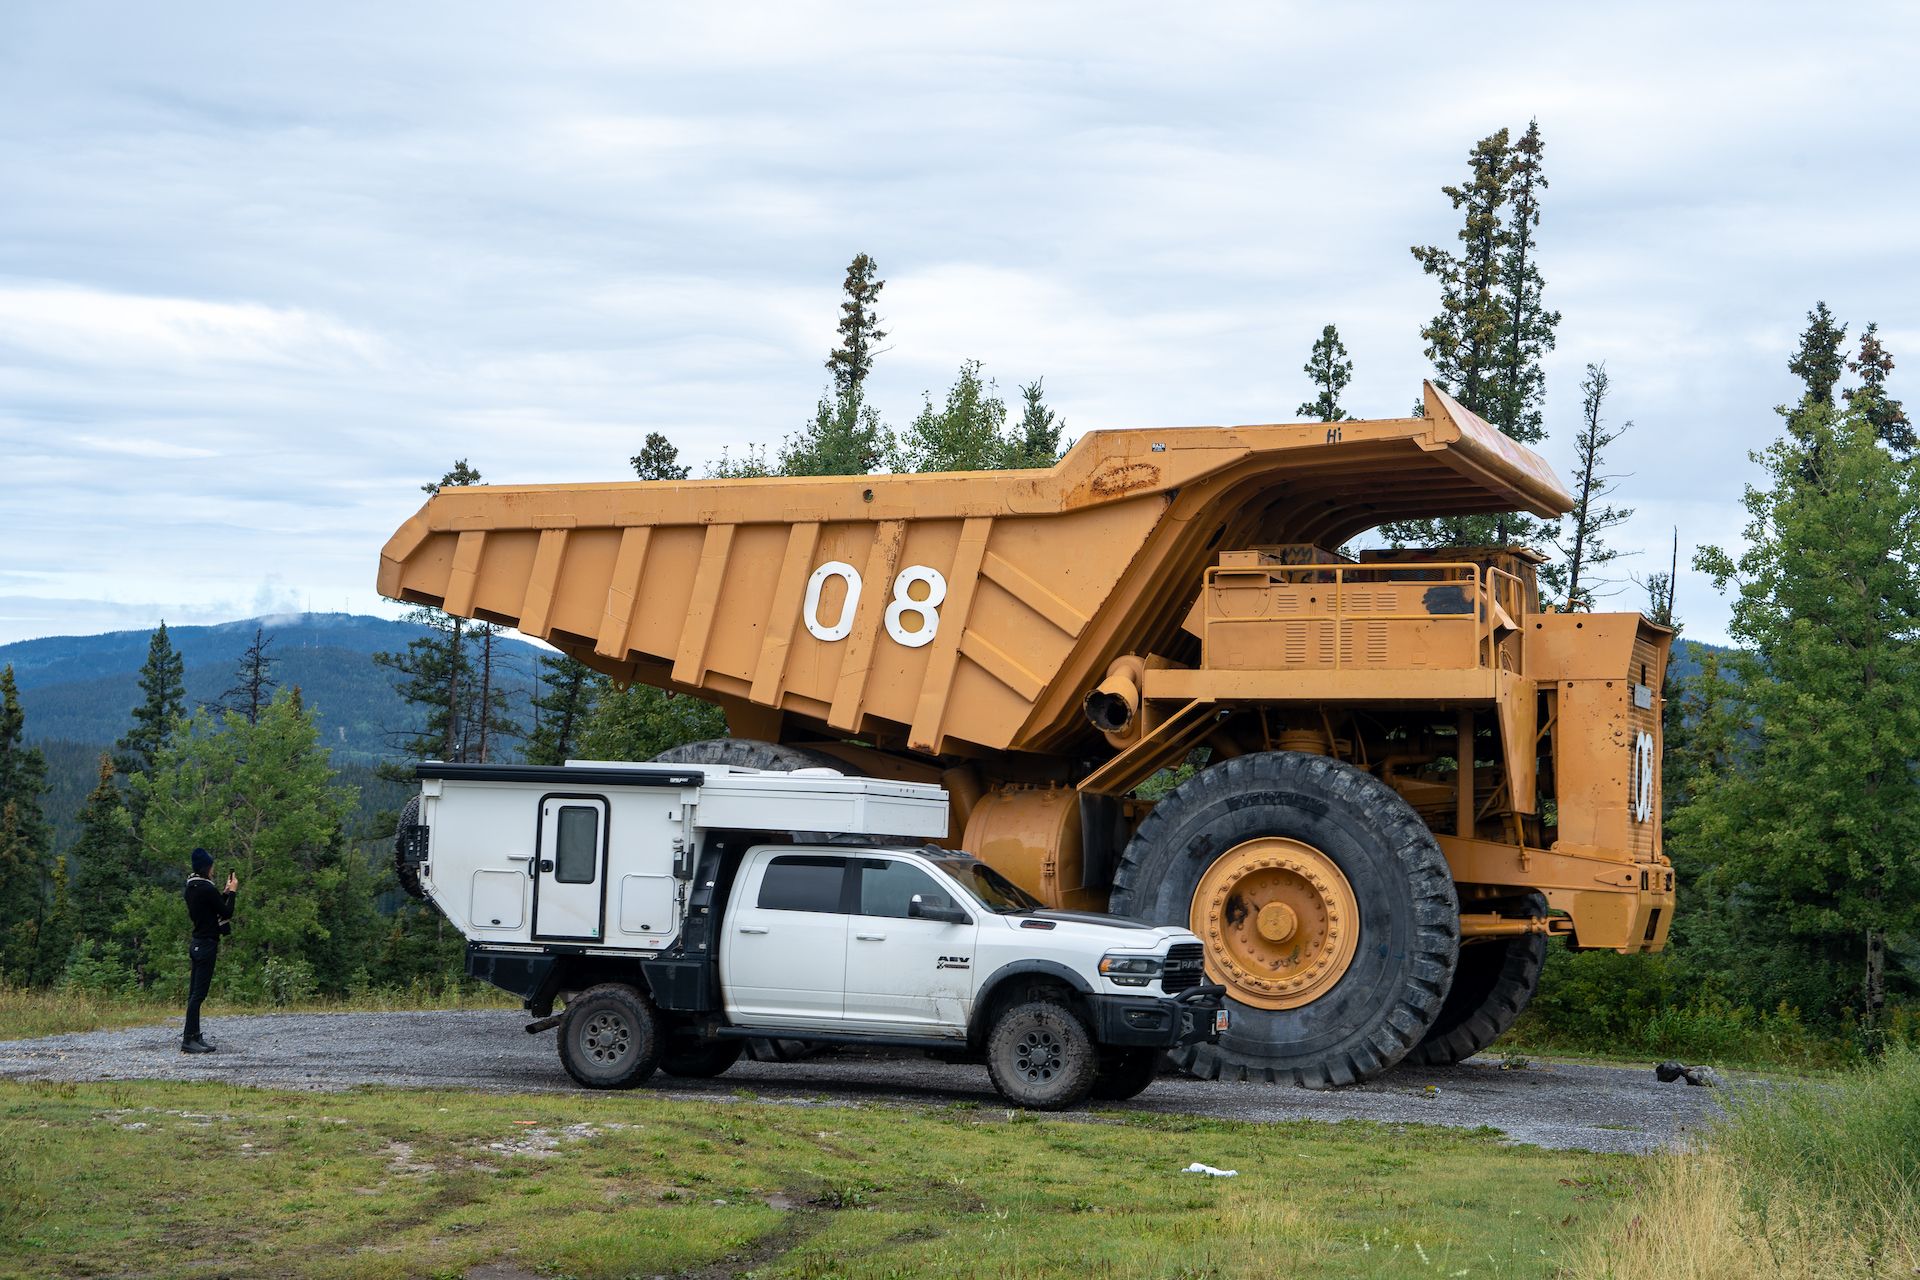 We found a pretty impressive retired mining truck and had to stop to compare Chemin blanc with this beast!